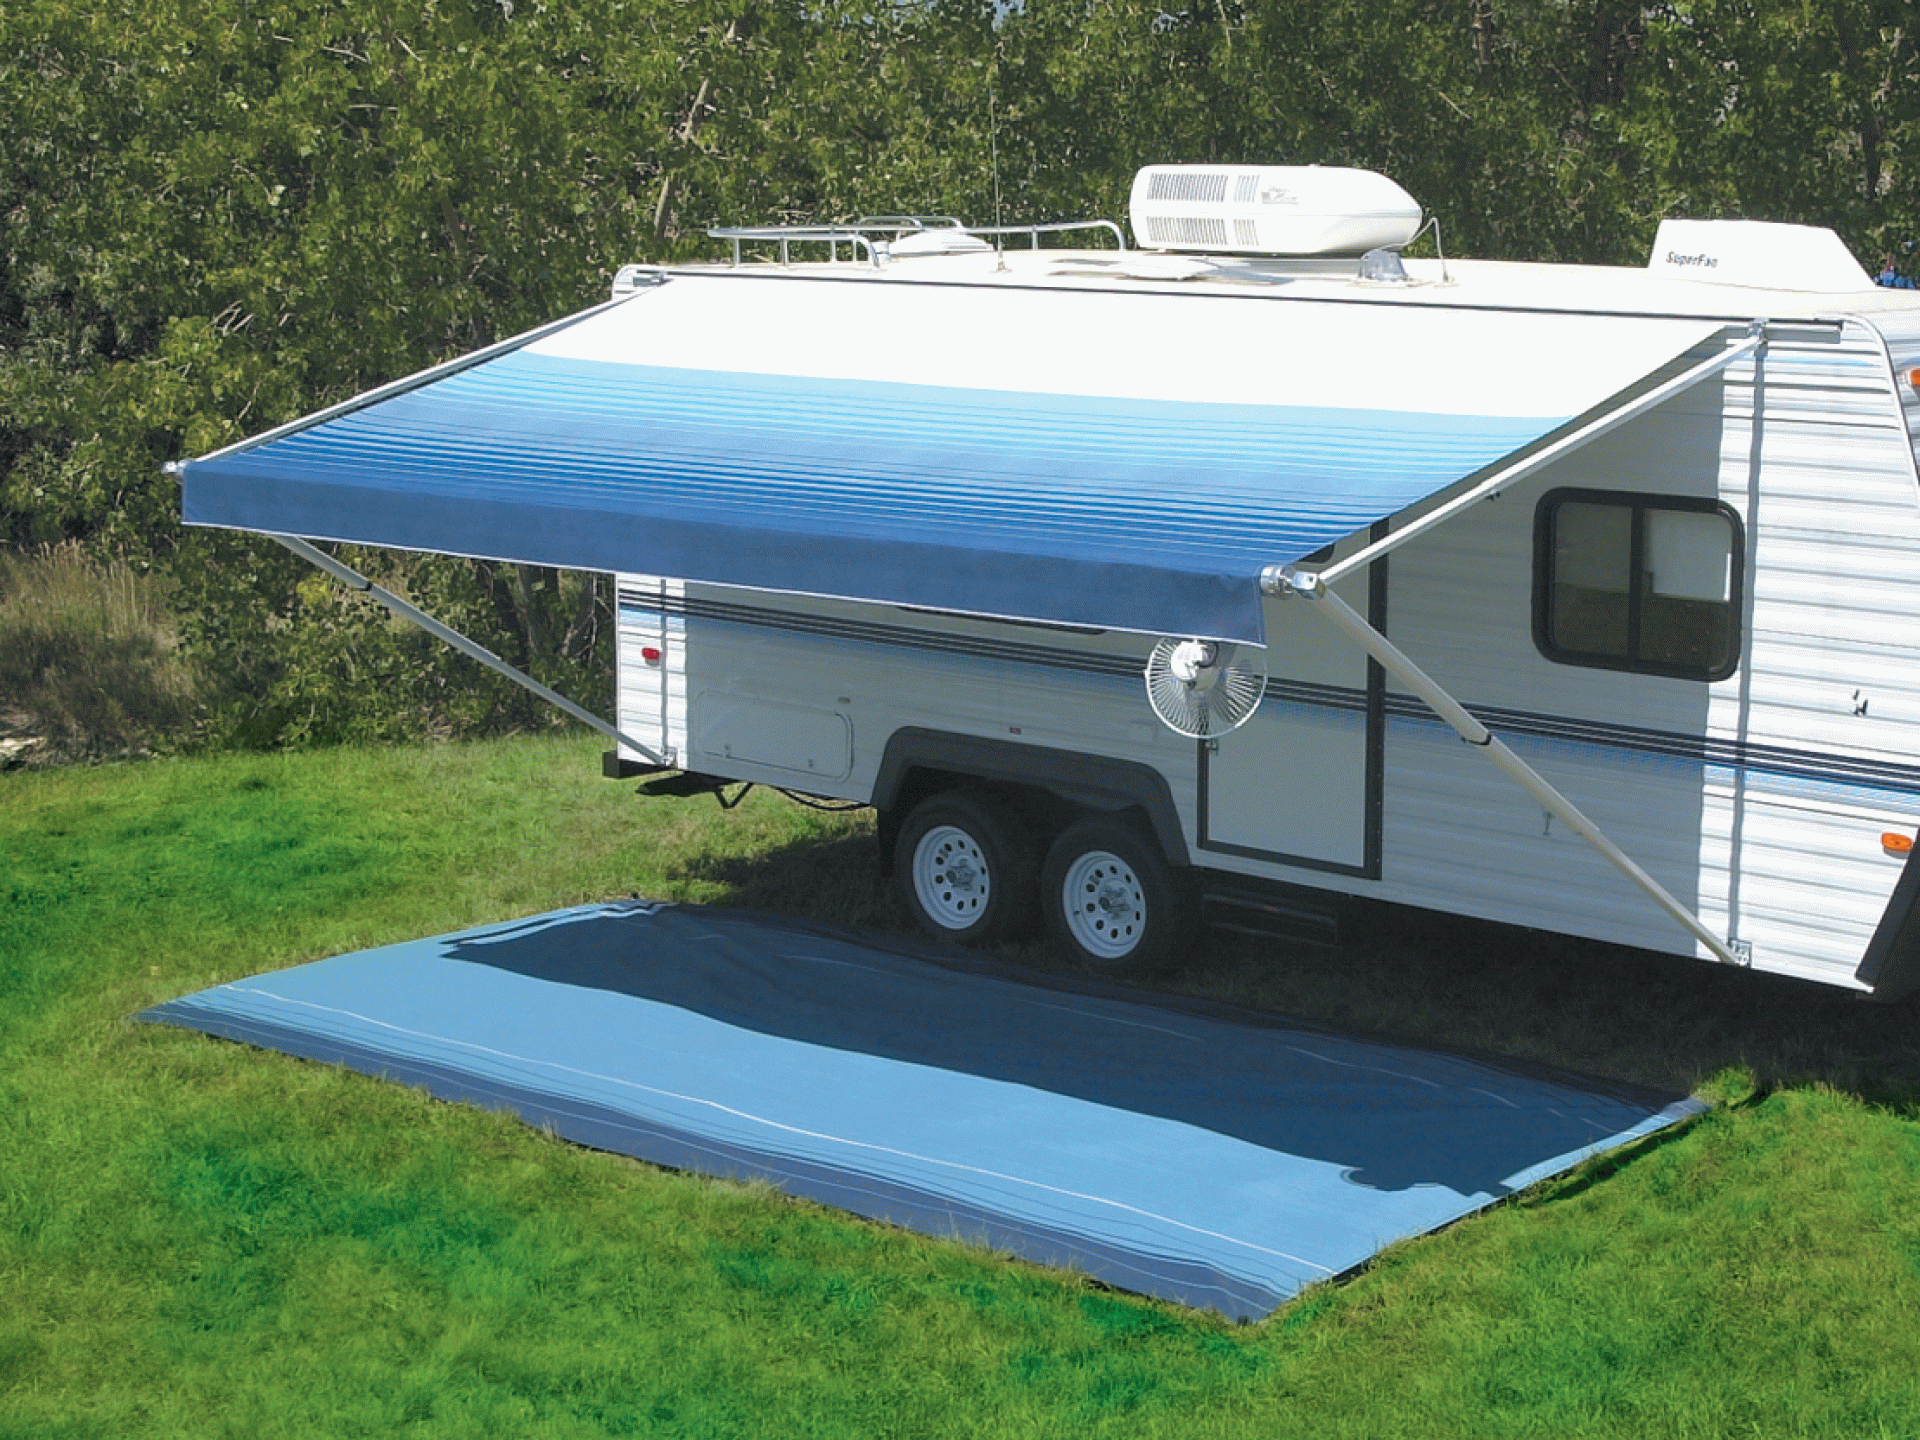 CAREFREE OF COLORADO | 77155500 | SIMPLICITY AWNING 15' BORDEAUX